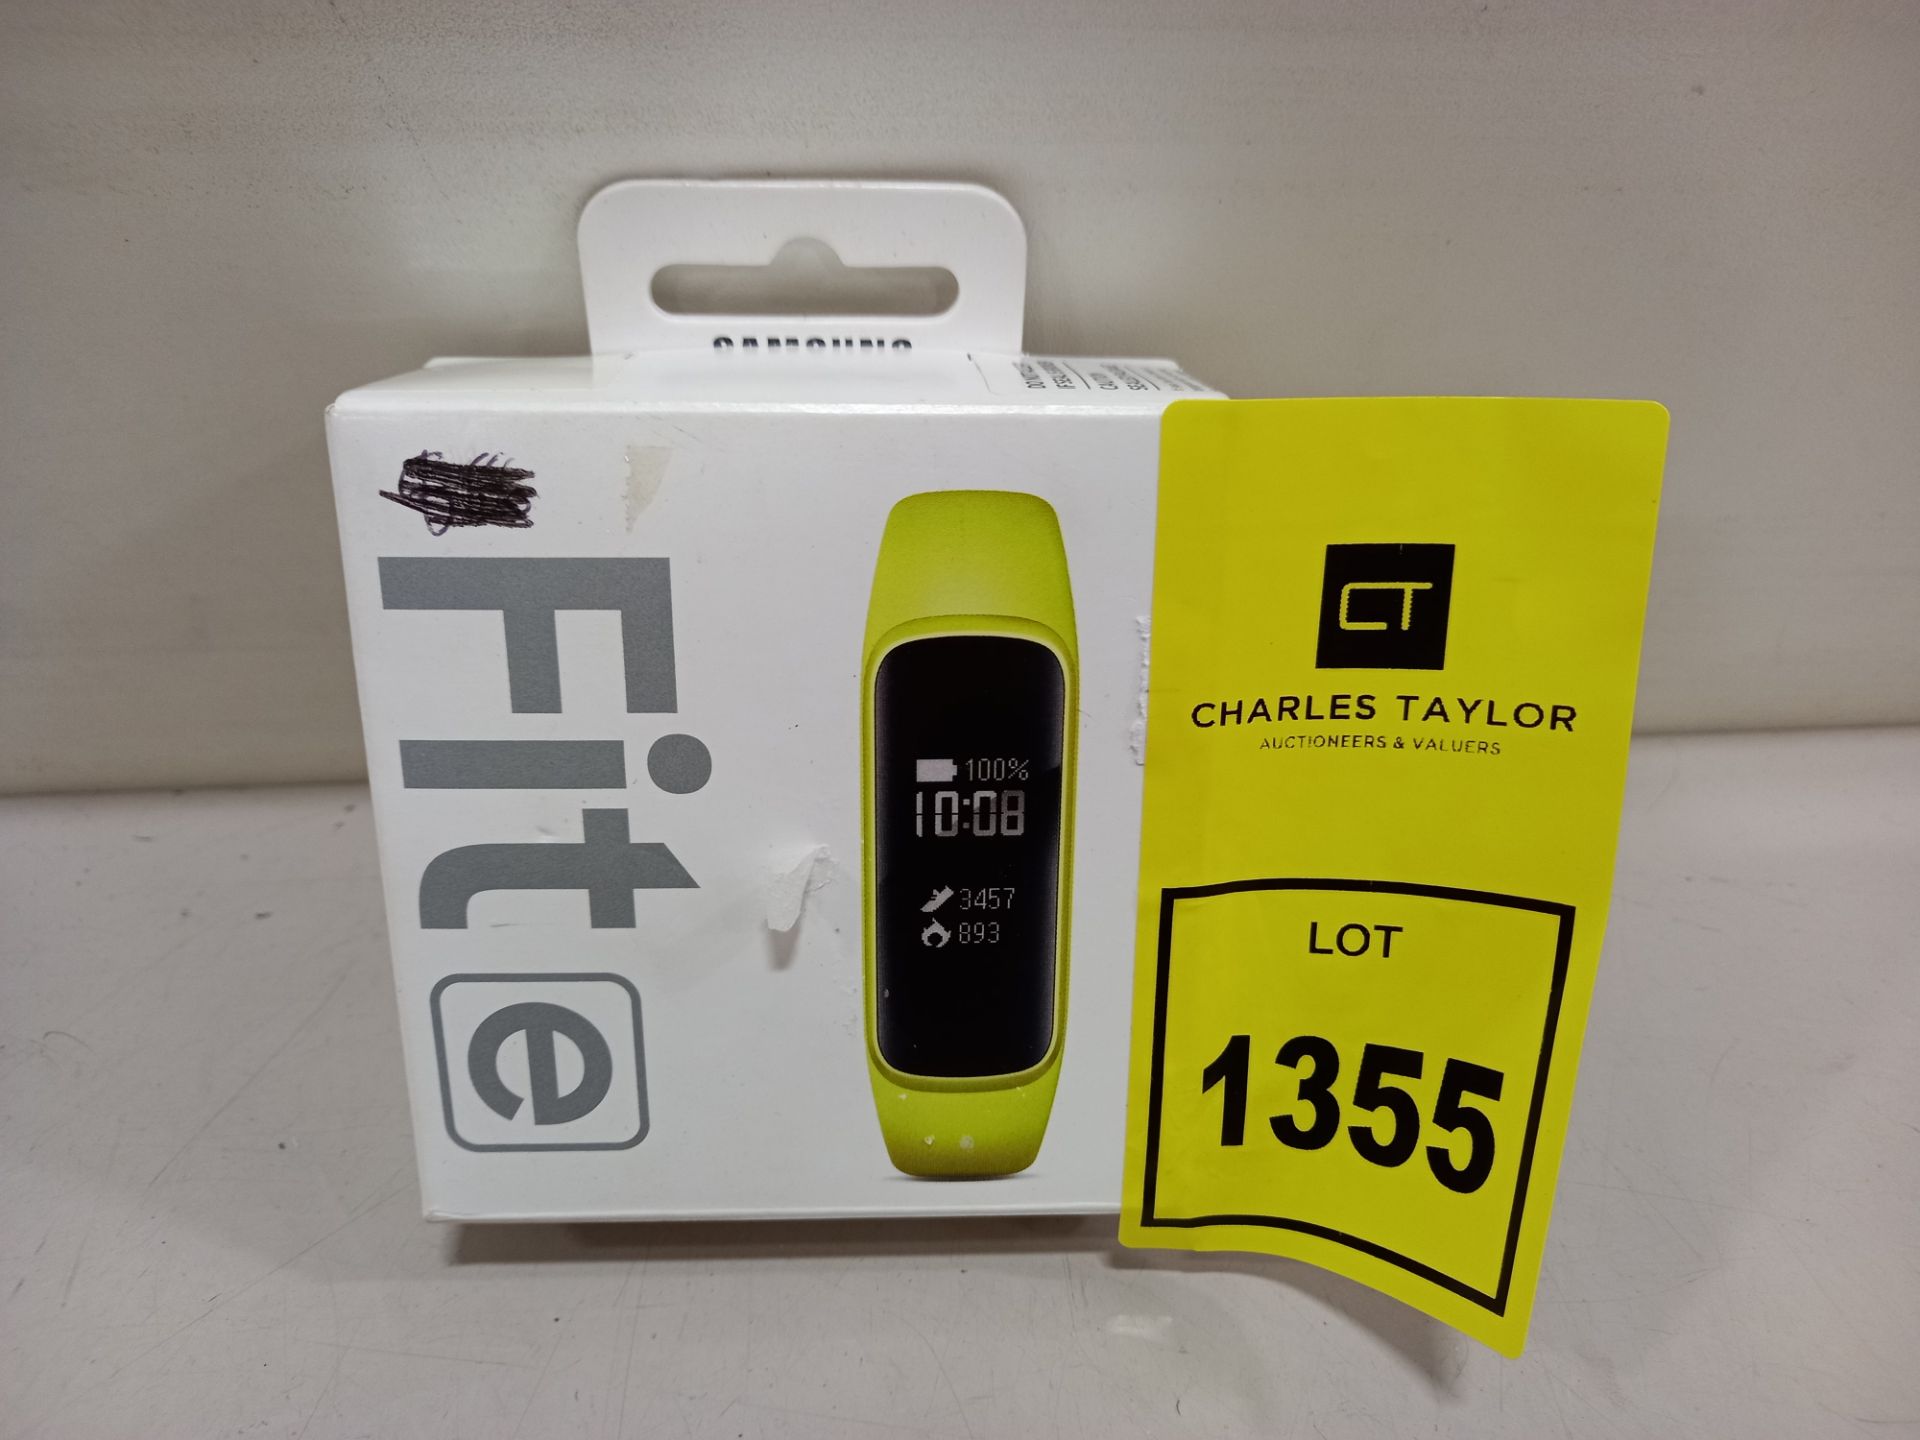 BOXED SAMSUNG FITNESS WATCH - WITH CHARGING CABLE